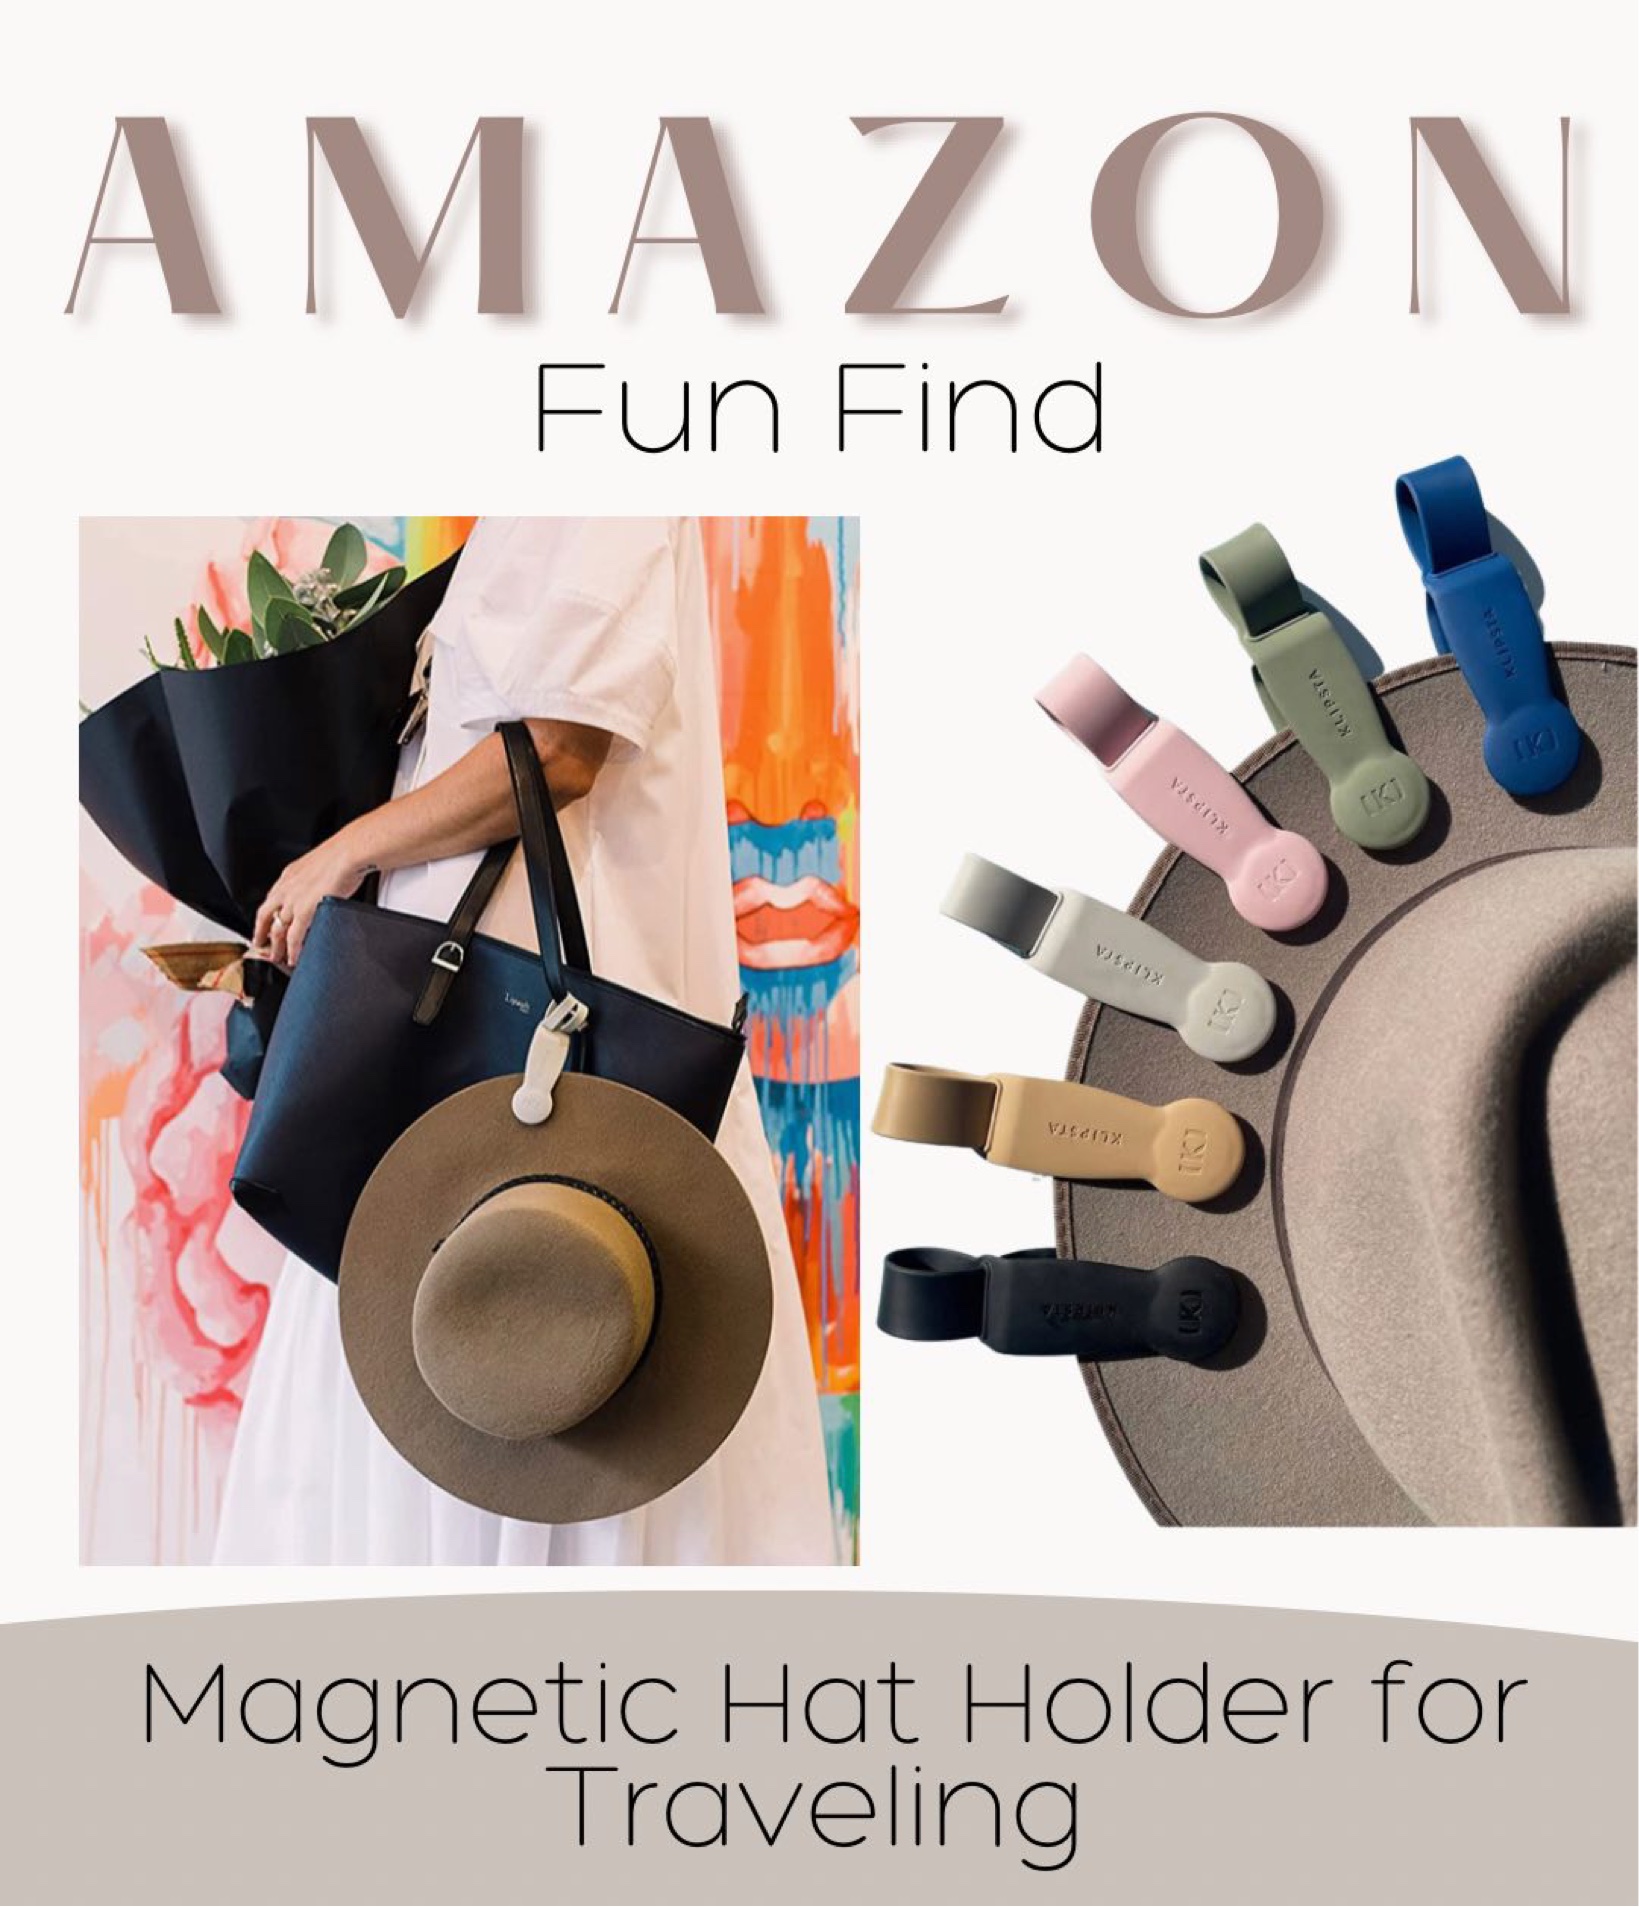 Magnetic Hat Holder for Traveling! These are perfect for airplanes or traveling so your hat doesn’t get smashed!!



Target, Target Style, Amazon, Spring, 2023, Spring ideas, Outfits, travel outfits / spring inspiration  / shoes, sandals / travel / Vacation / Beach/   / wear/ travel outfit / outfit inspo / Sunglasses | Beach Tote | Heels | Amazon Fashion | Target Fashion | Nordstrom | Handbags  dress / spring wear #LTKfit 

#LTKtravel #LTKstyletip #LTKitbag